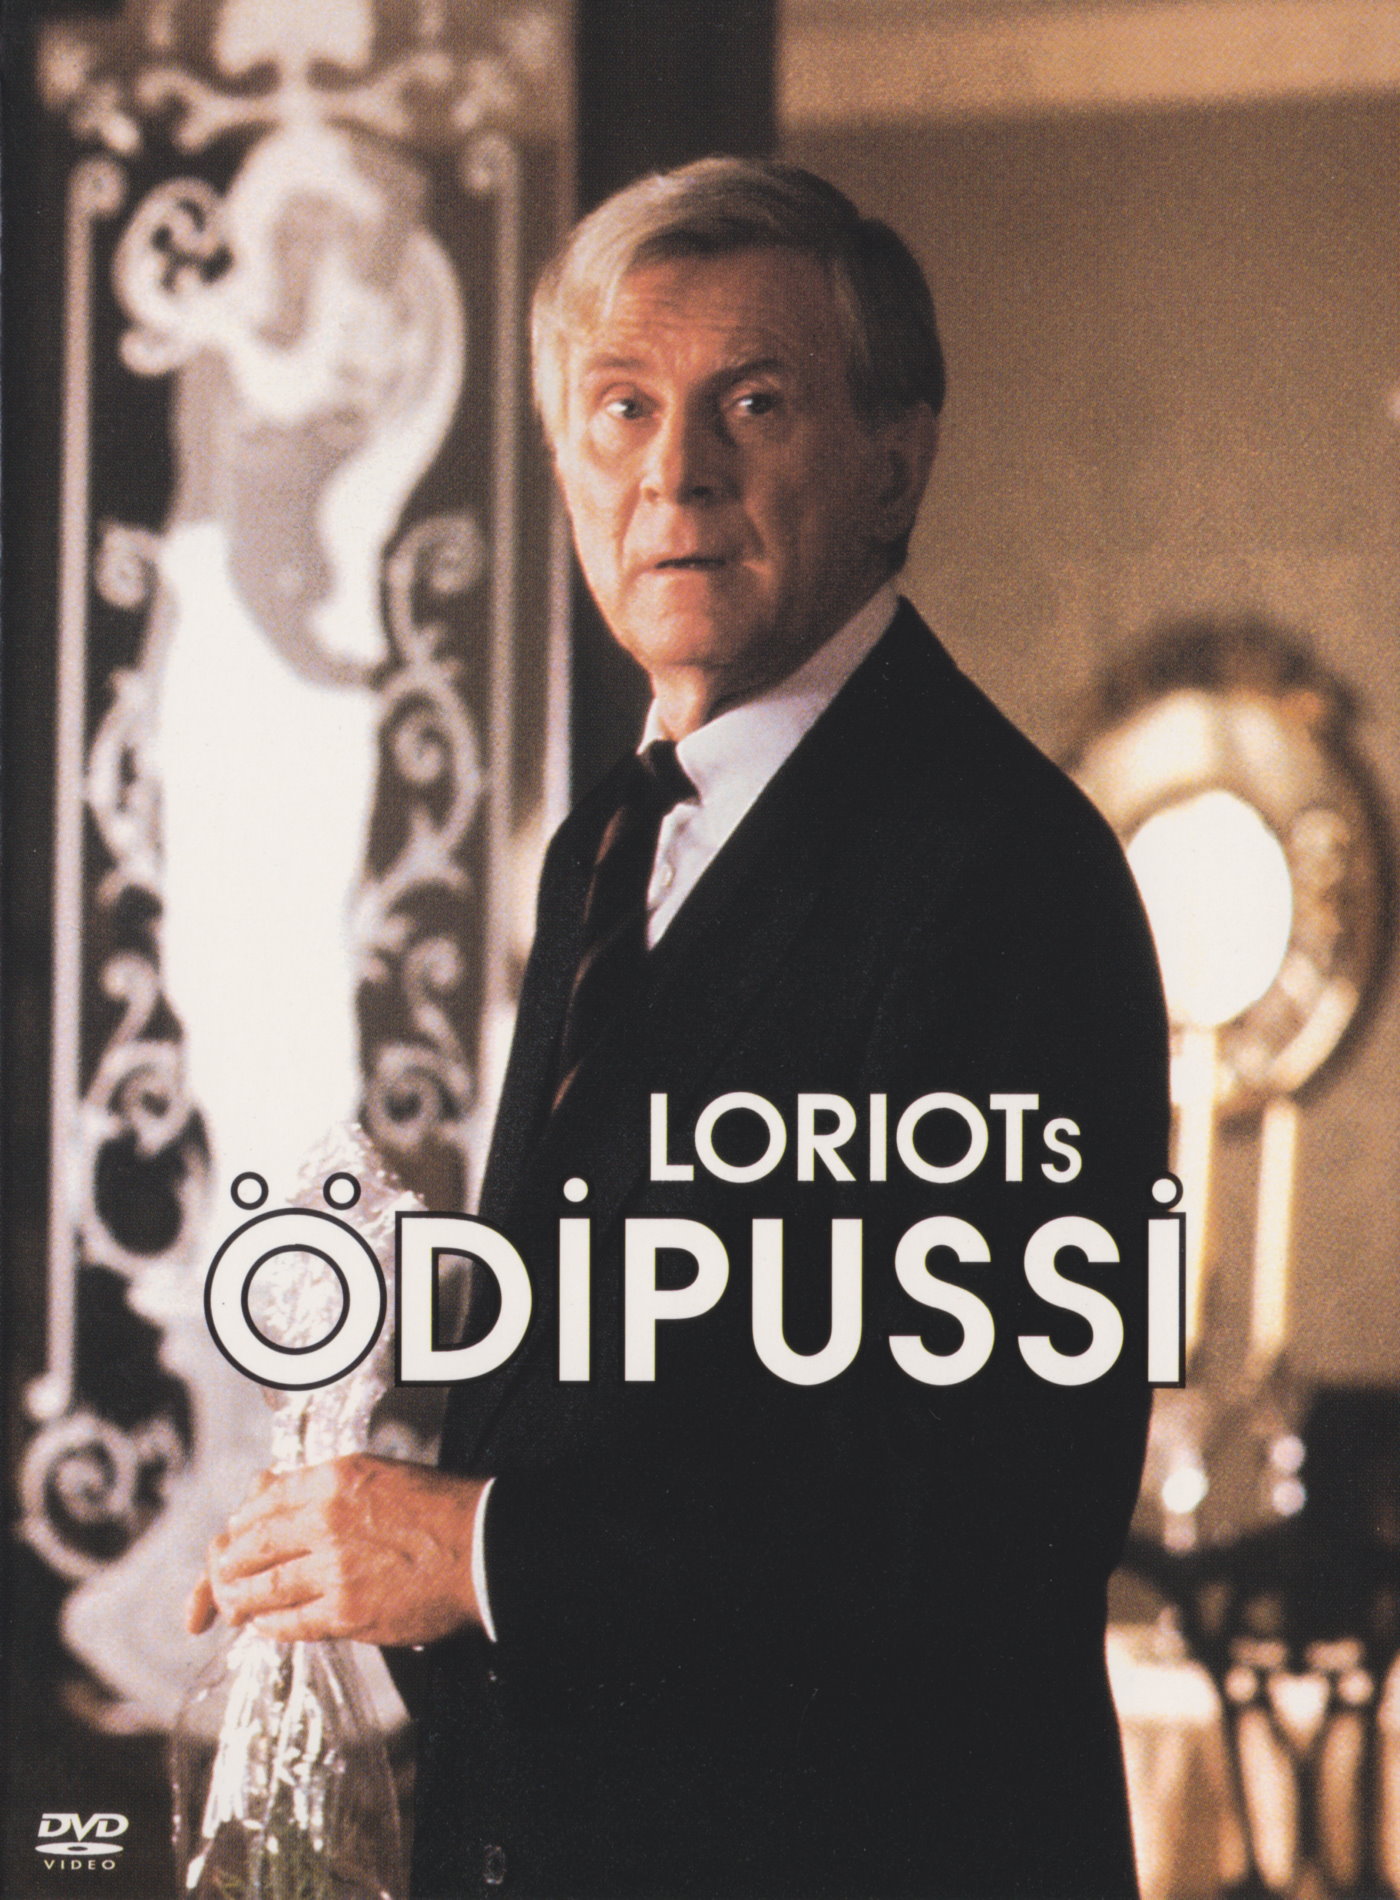 Cover - Loriots Ödipussi.jpg